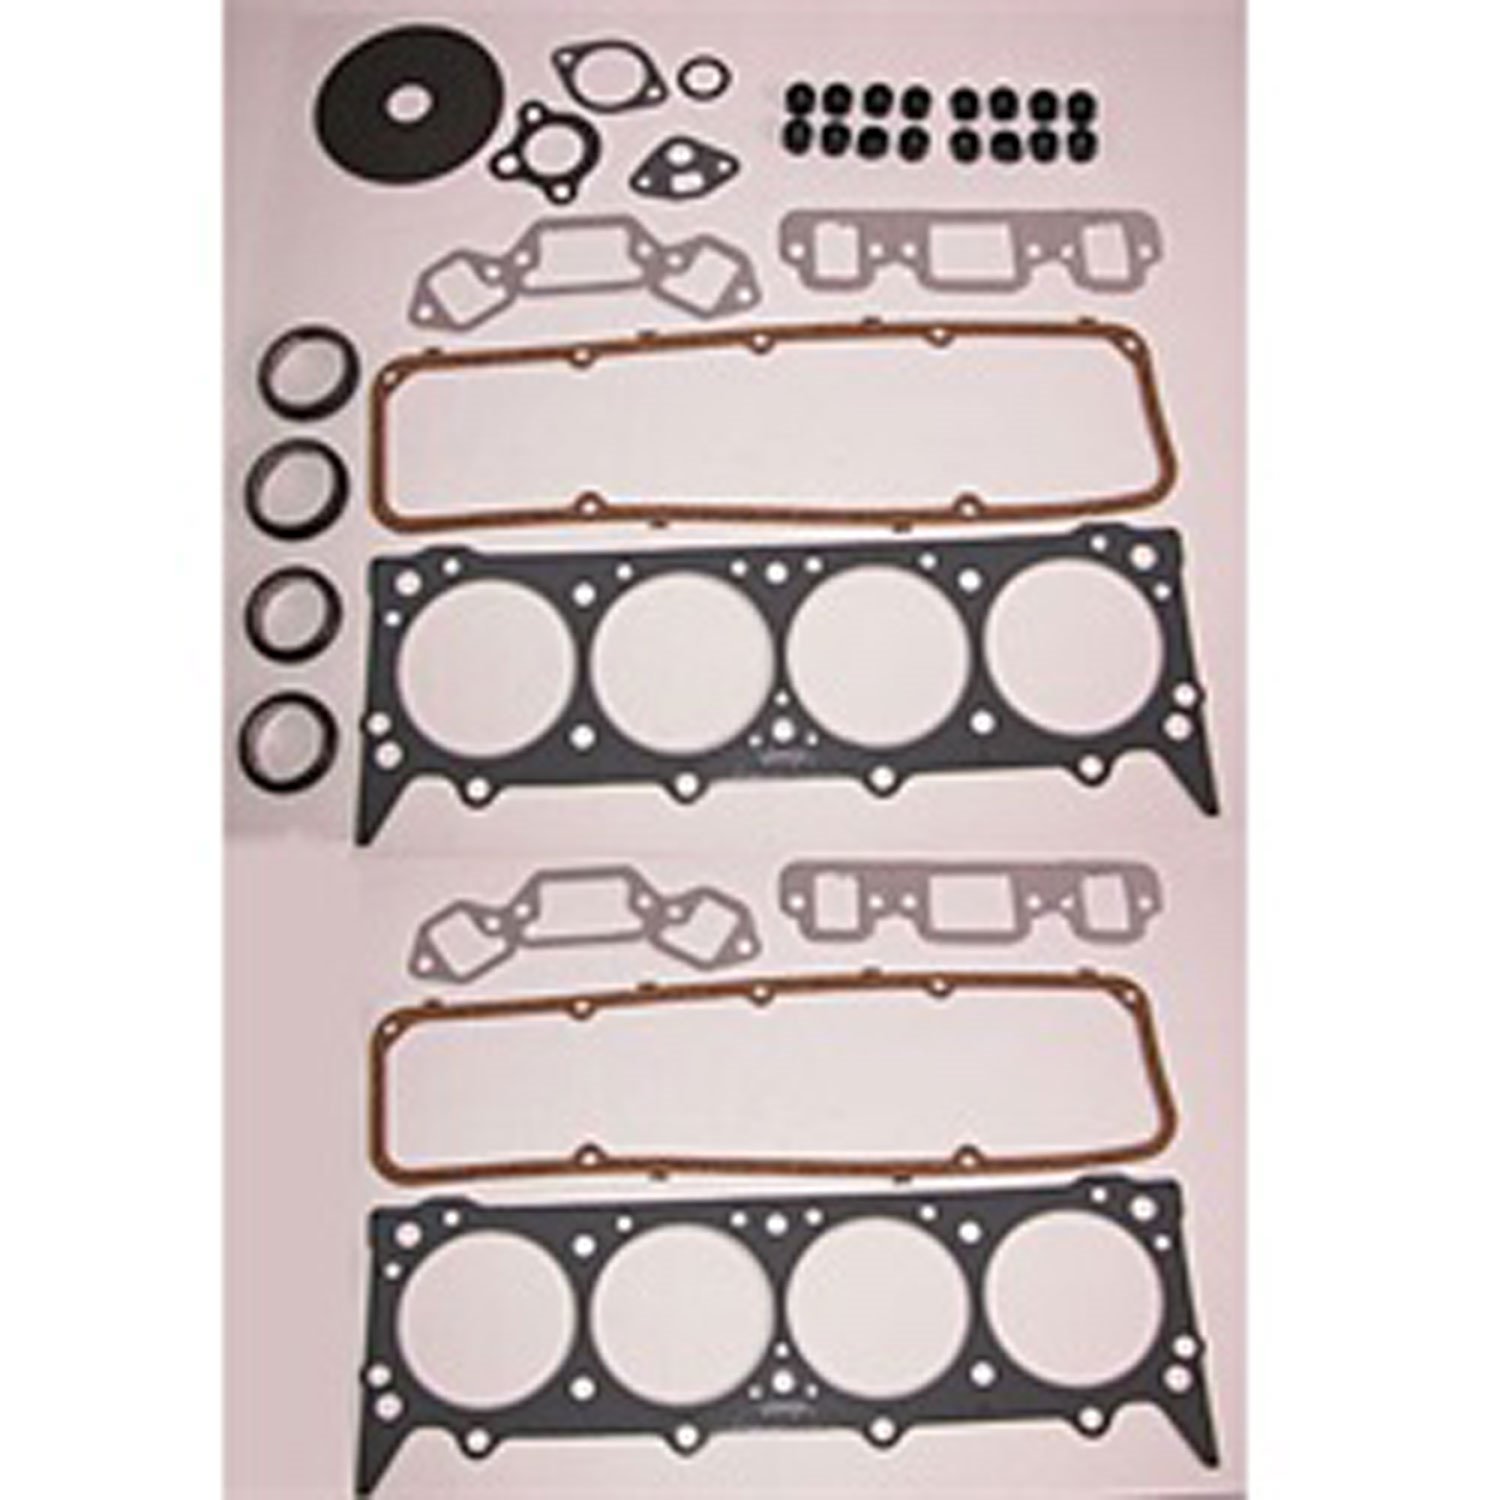 This upper engine gasket set from Omix-ADA fits the 360 and 401 cubic inch engines in 74-91 SJ model